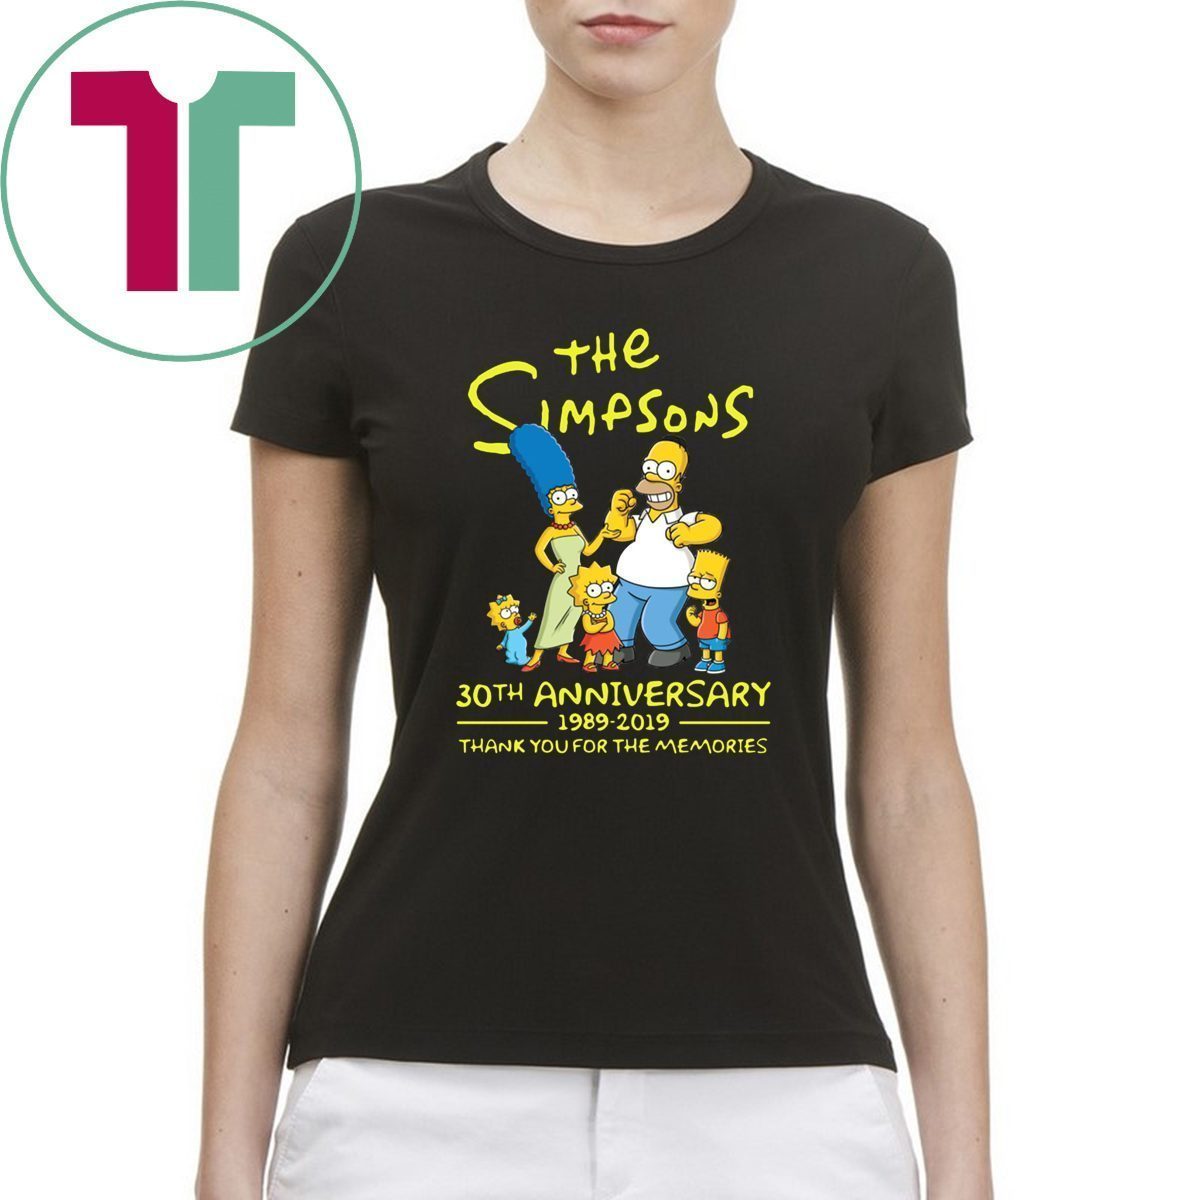 The simpsons-30th anniversary 1989-2019 thank you for memories Shirt ...